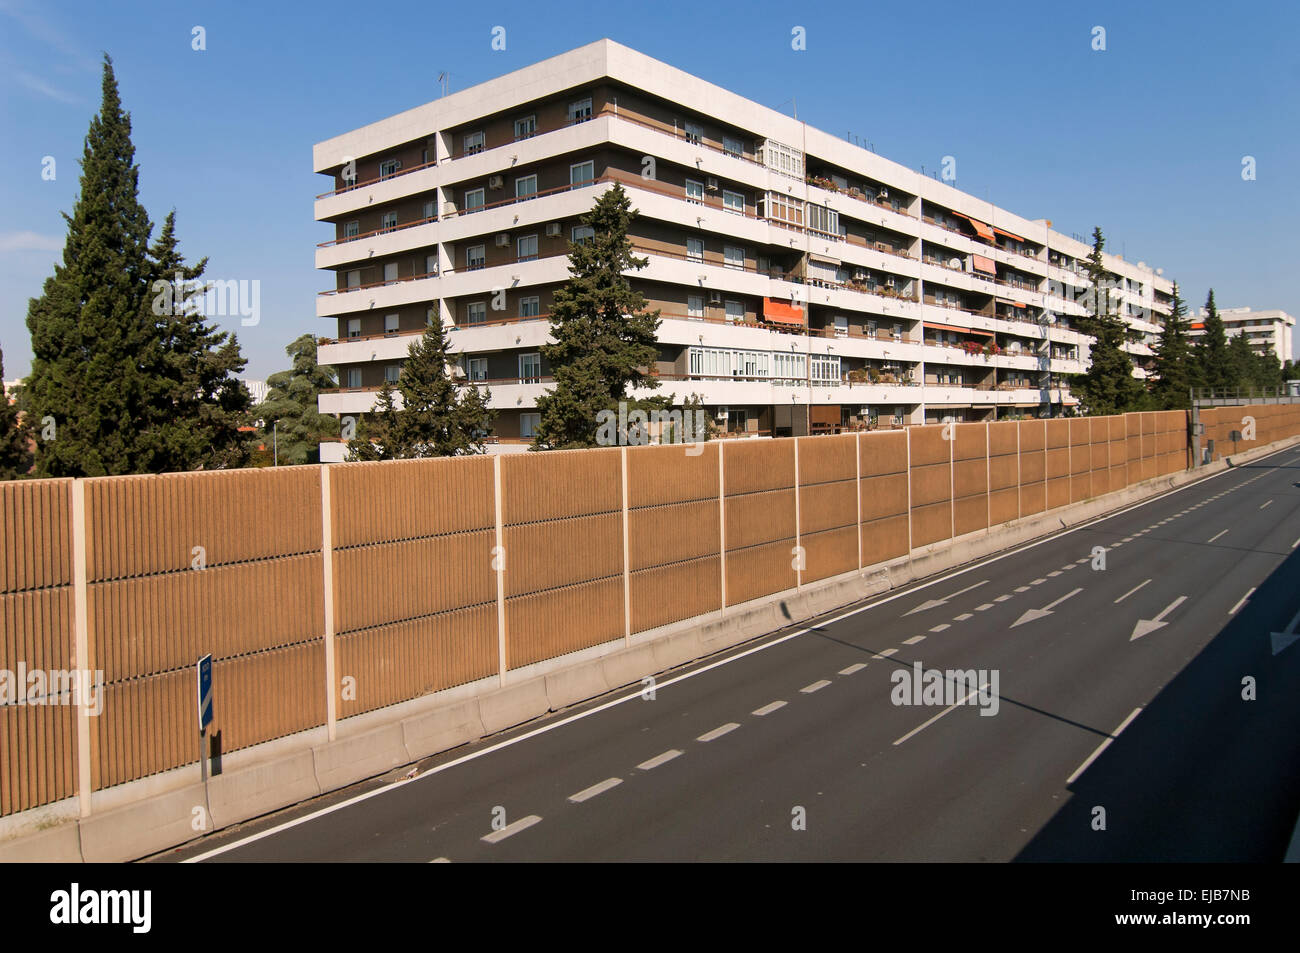 Acoustic barriers on the road, Seville, Region of Andalusia, Spain, Europe Stock Photo